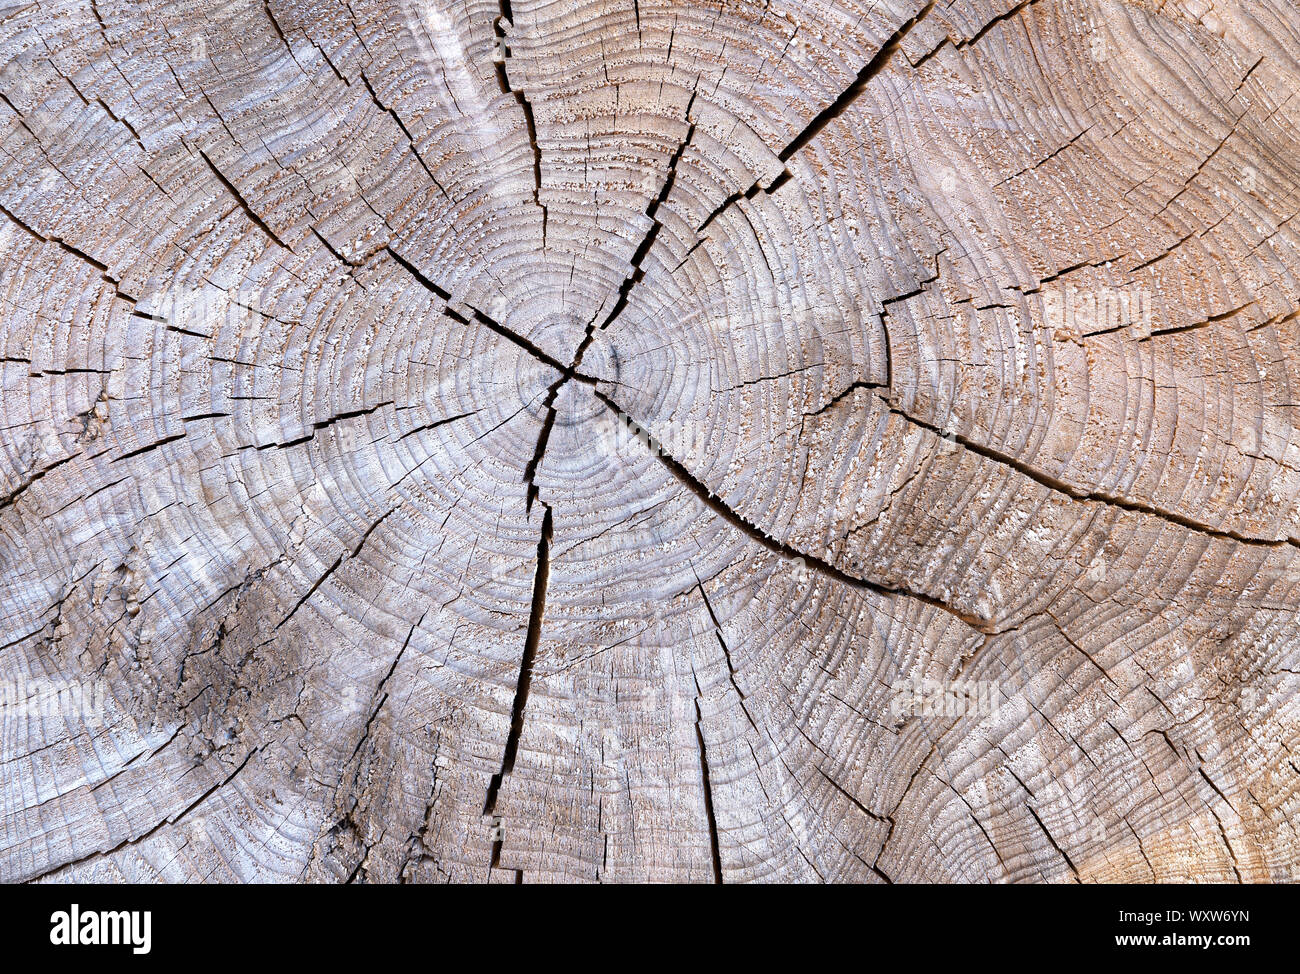 Cracked texture of a tree trunk Stock Photo